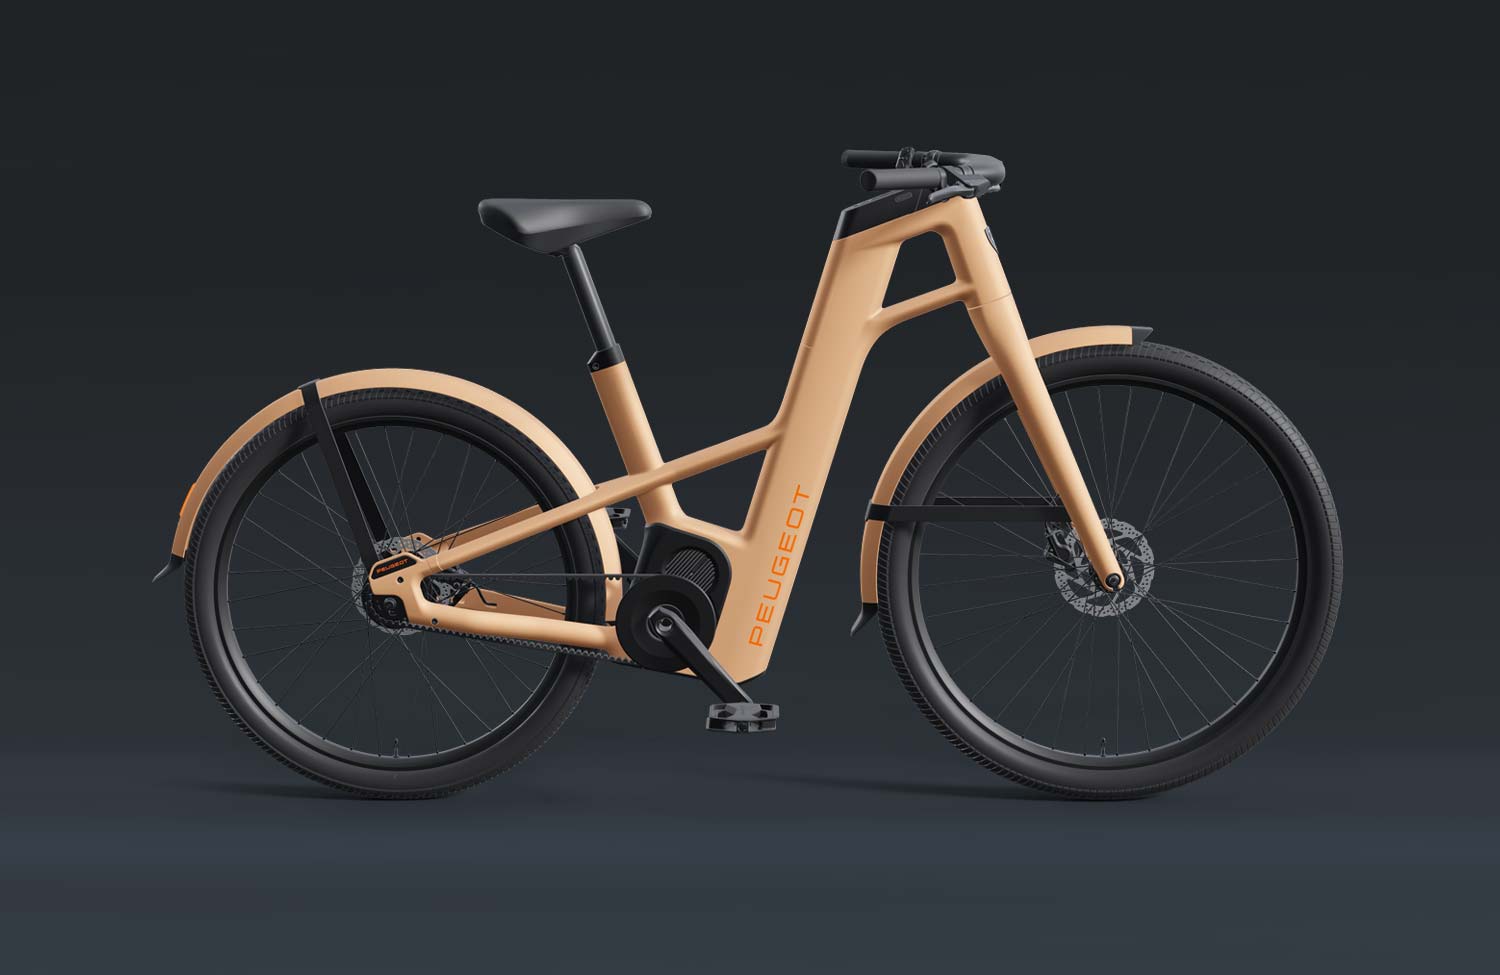 Three types for all urban needs Peugeot shows new ebikes with